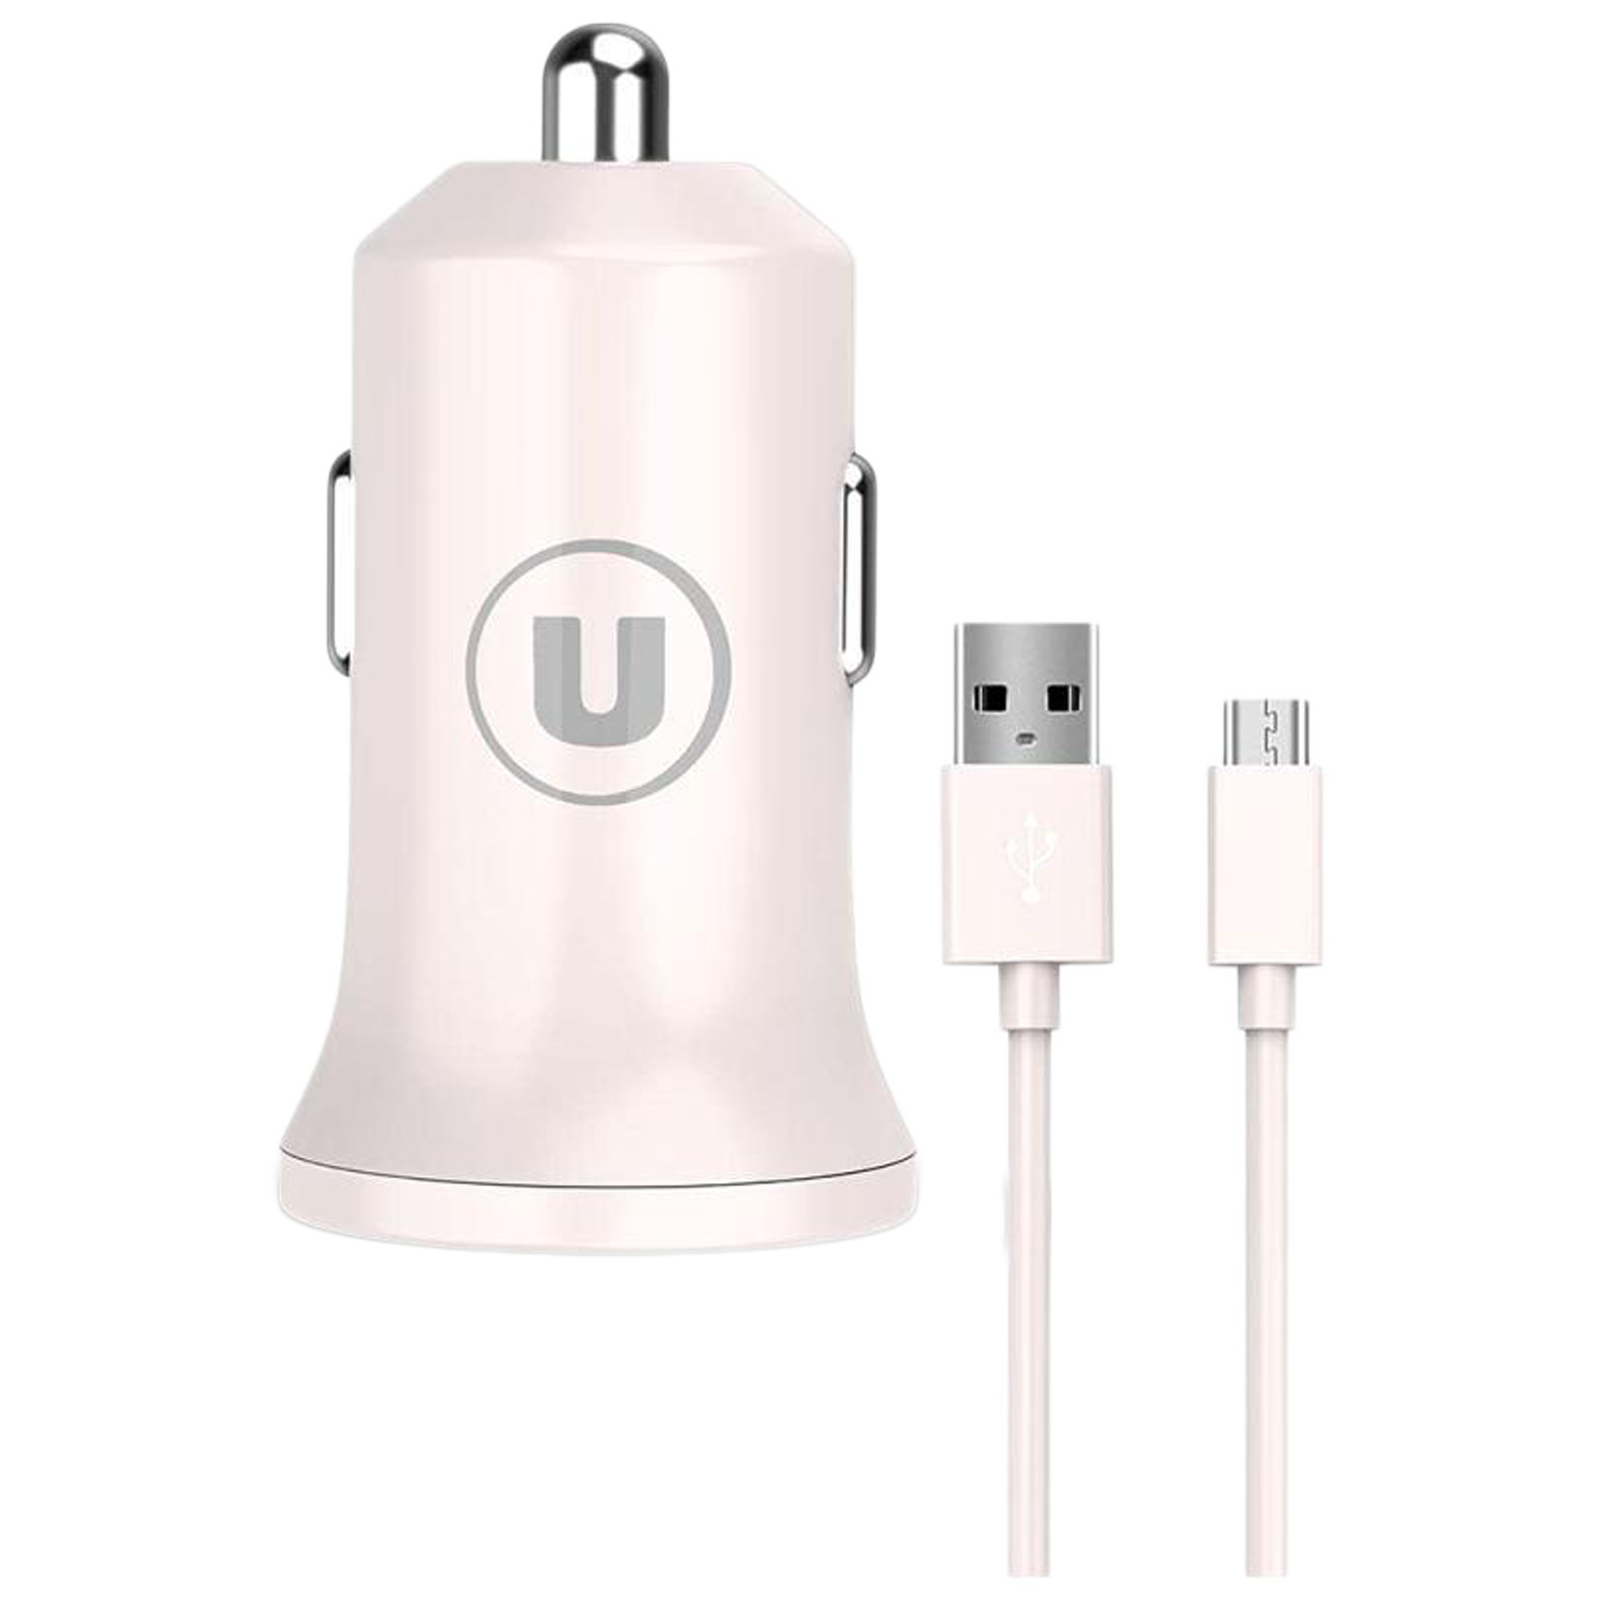 Bandridge 2.4 Amp 1 USB Port Car Charging Adapter with Micro USB Cable (Fast Charging Compatible, BNDCCW, White)_1